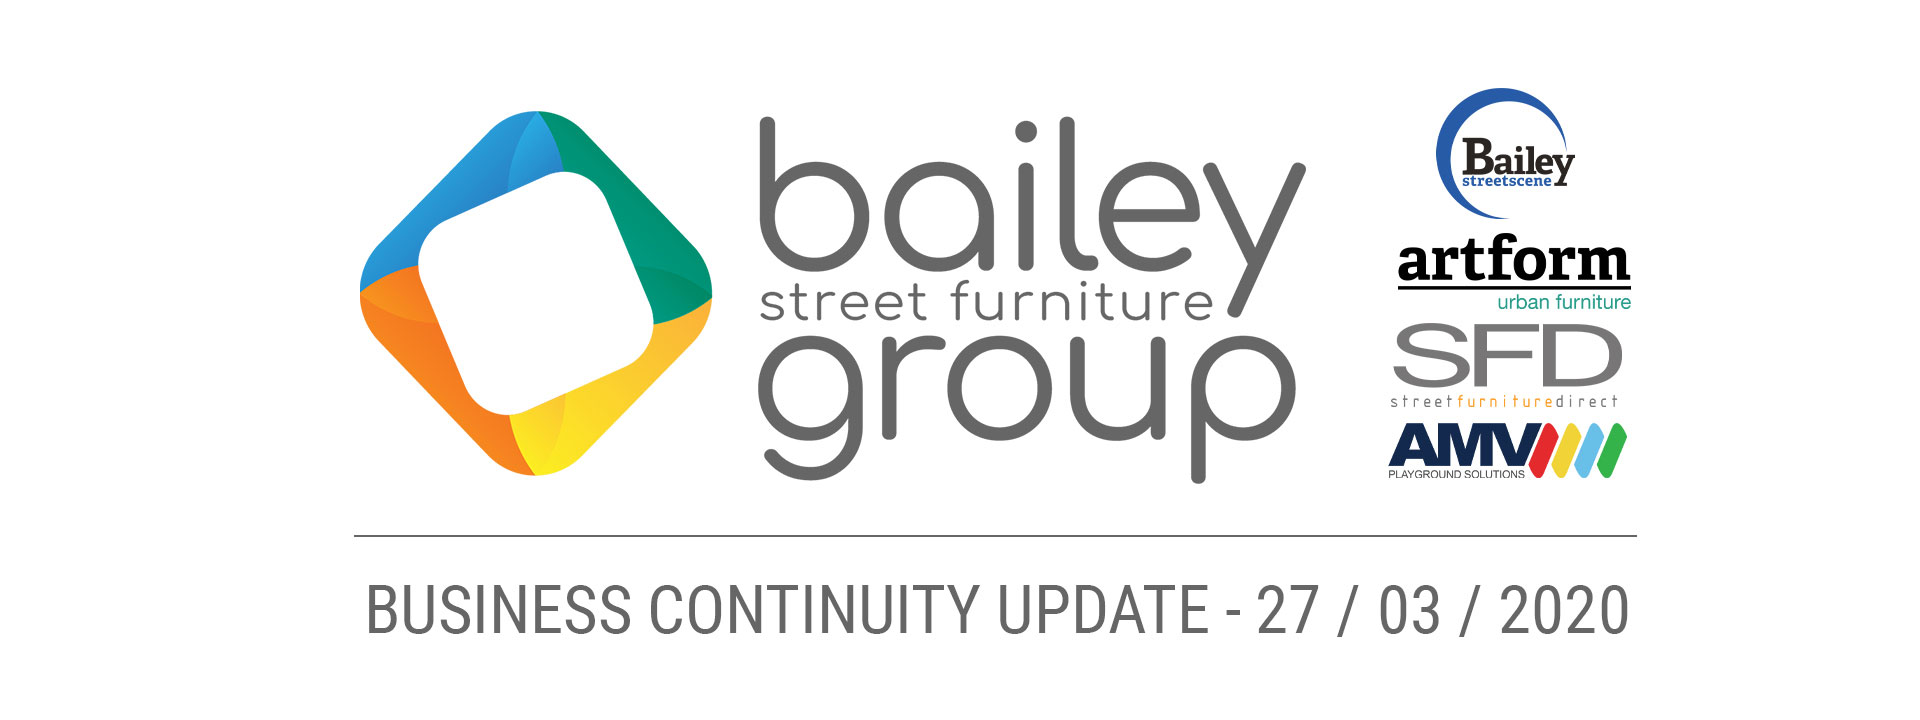 BUSINESS CONTINUITY UPDATE - 27/03/2020